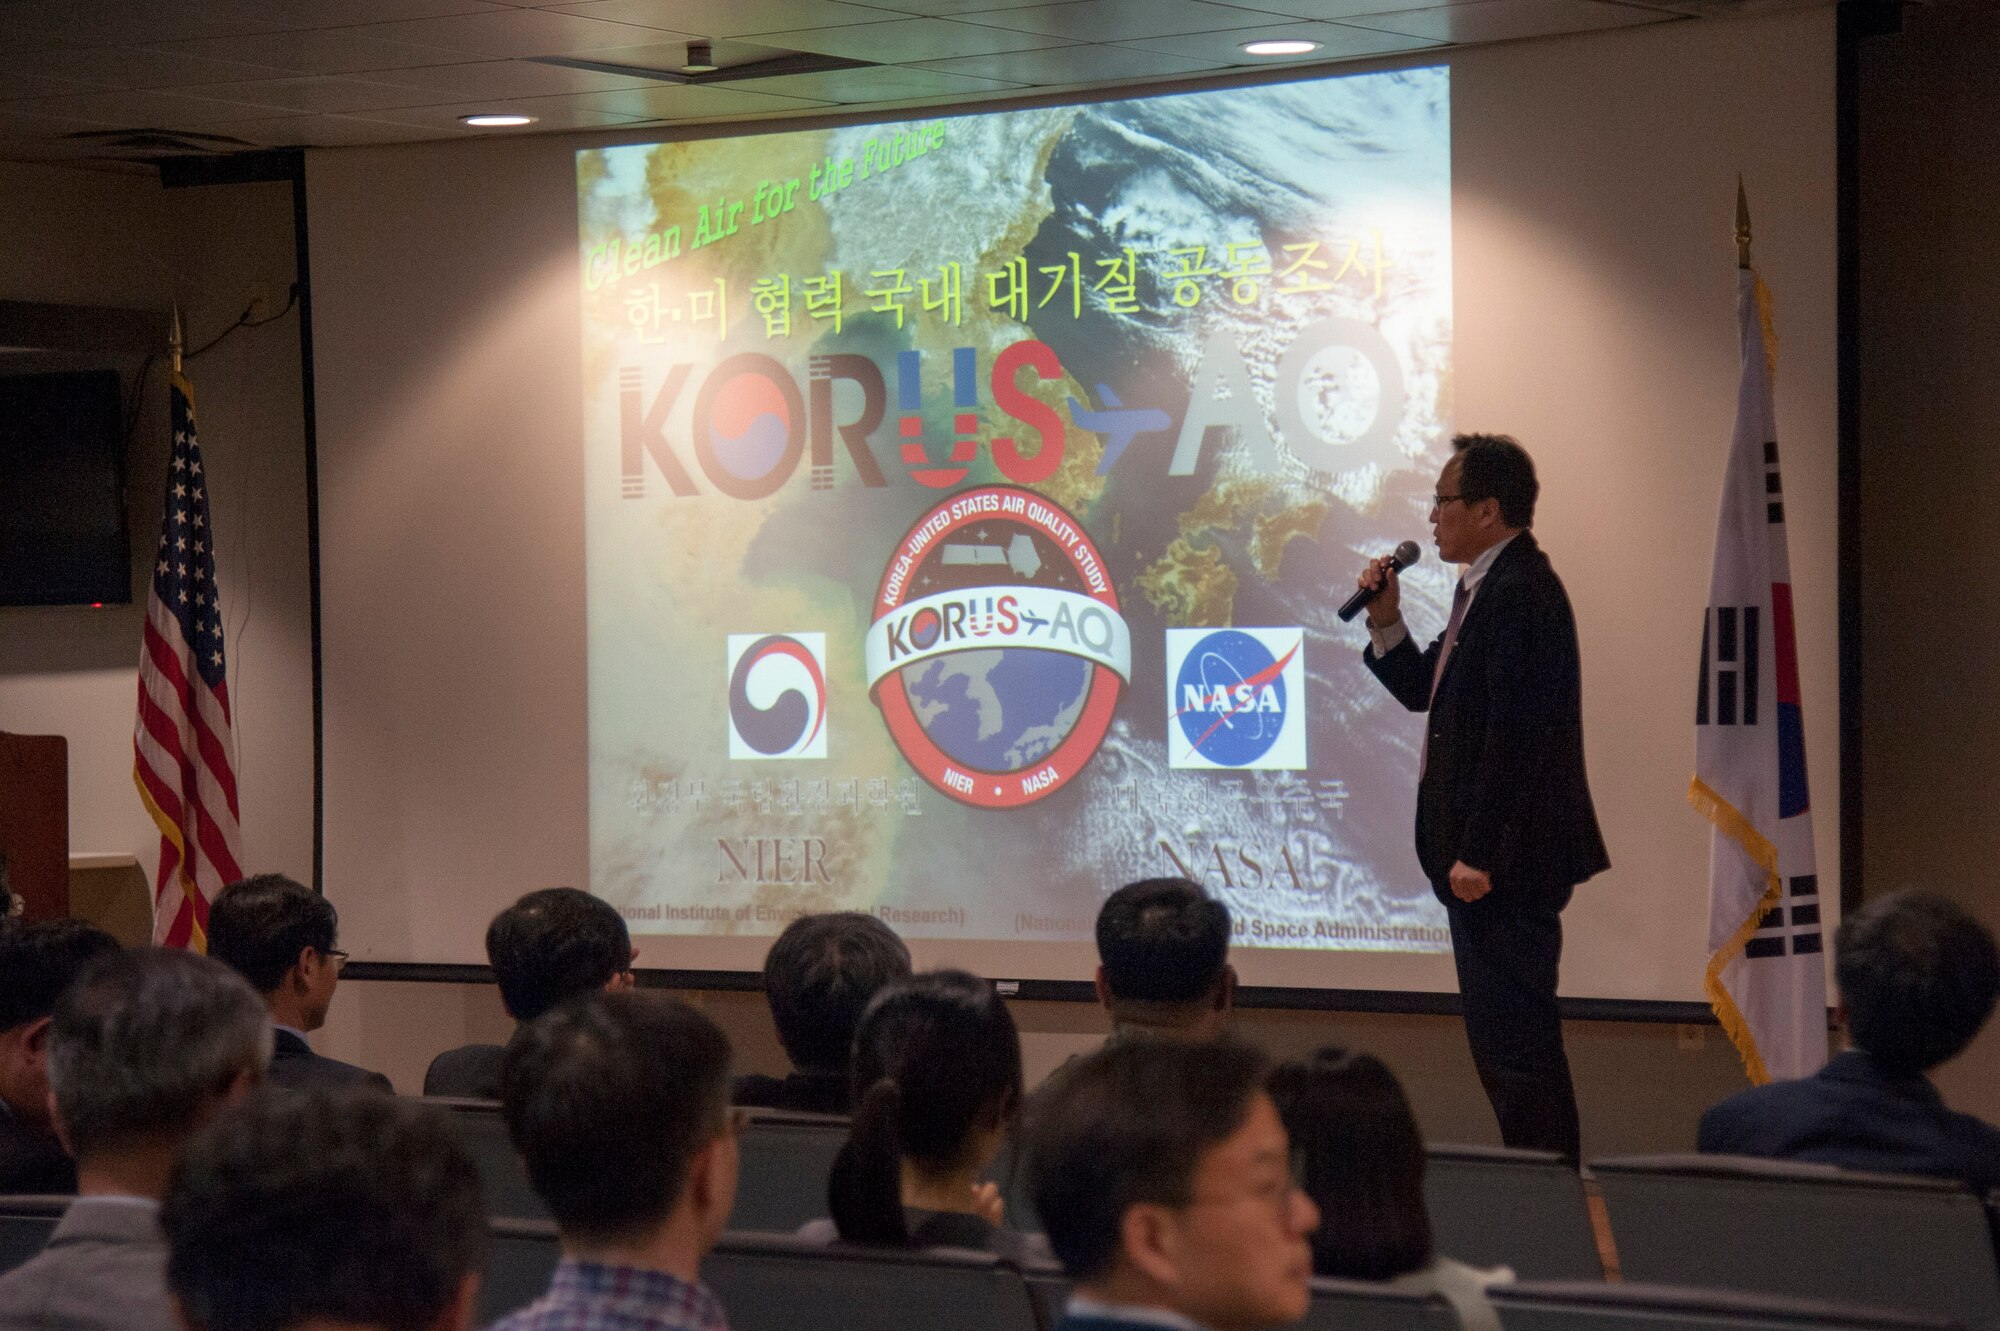 You-Deog Hong, Air Quality Research Division director, Climates and Air Quality Research Department, gives an overview of Korea United States-Air Quality (KORUS-AQ) Experiment during a media day at Osan Air Base, Republic of Korea, April 29, 2016. KORUS-AQ is a step toward an international effort to develop a global air quality observation system that will include satellites from both countries and a network of surface monitoring sites, models, and airborne sampling. (U.S. Air Force photo by Staff Sgt. Jonathan Steffen/Released)